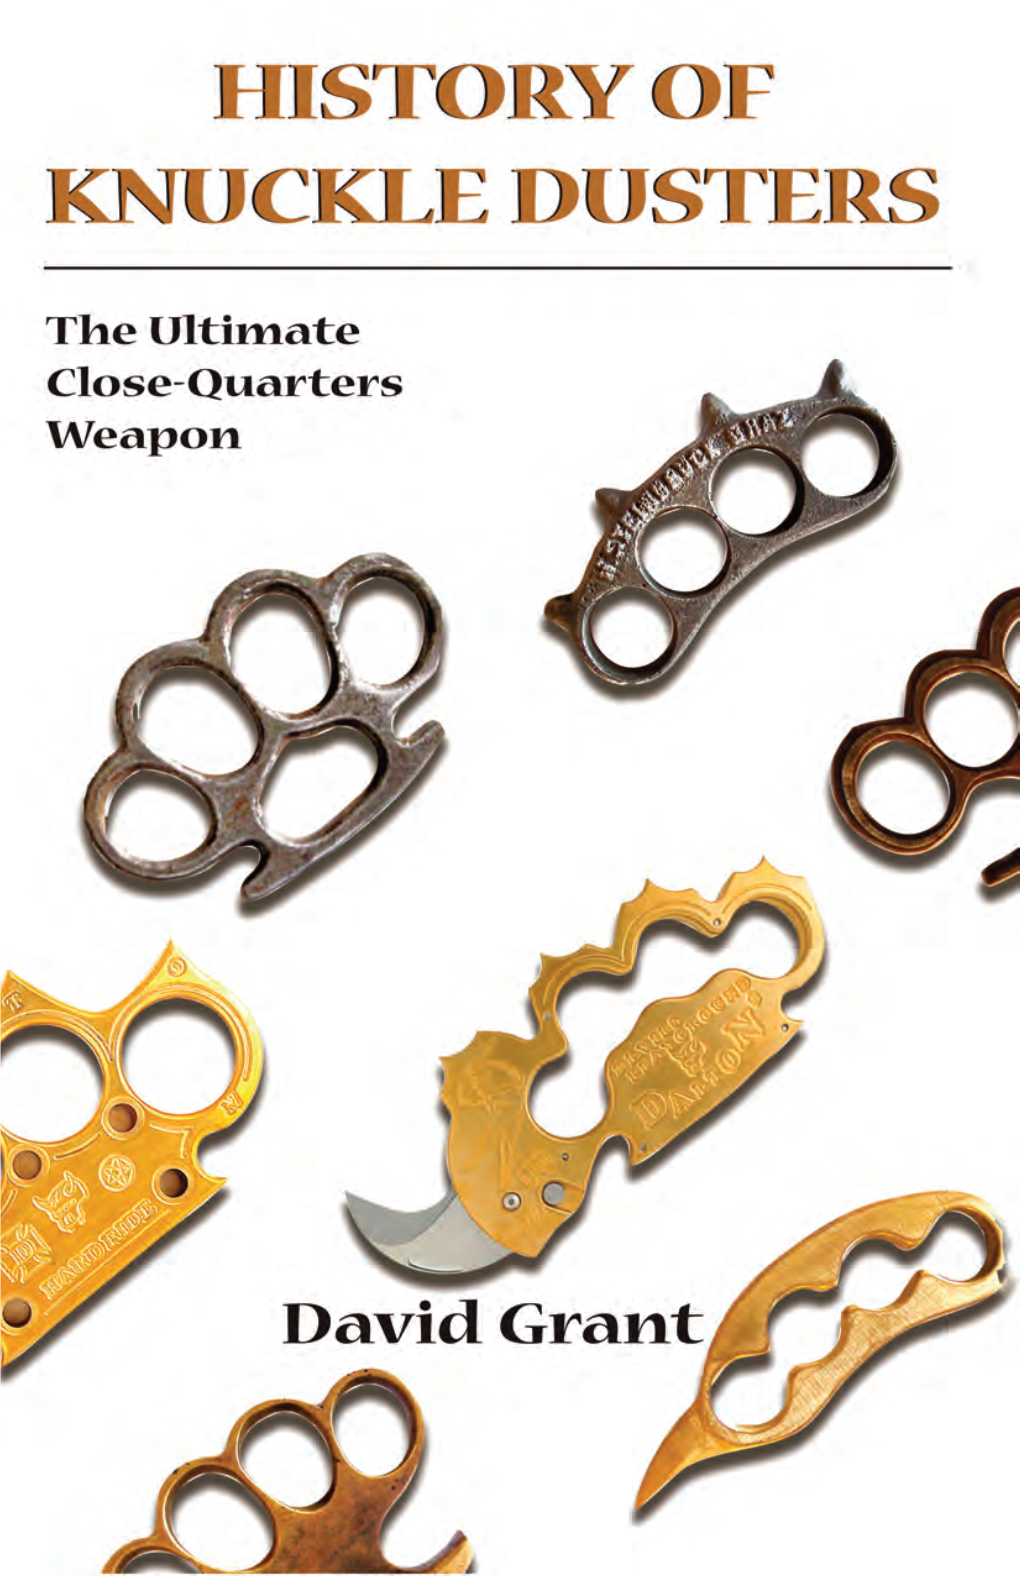 History of Knuckle Dusters: the Ultimate Close-Quarters Weapon by Dave Grant